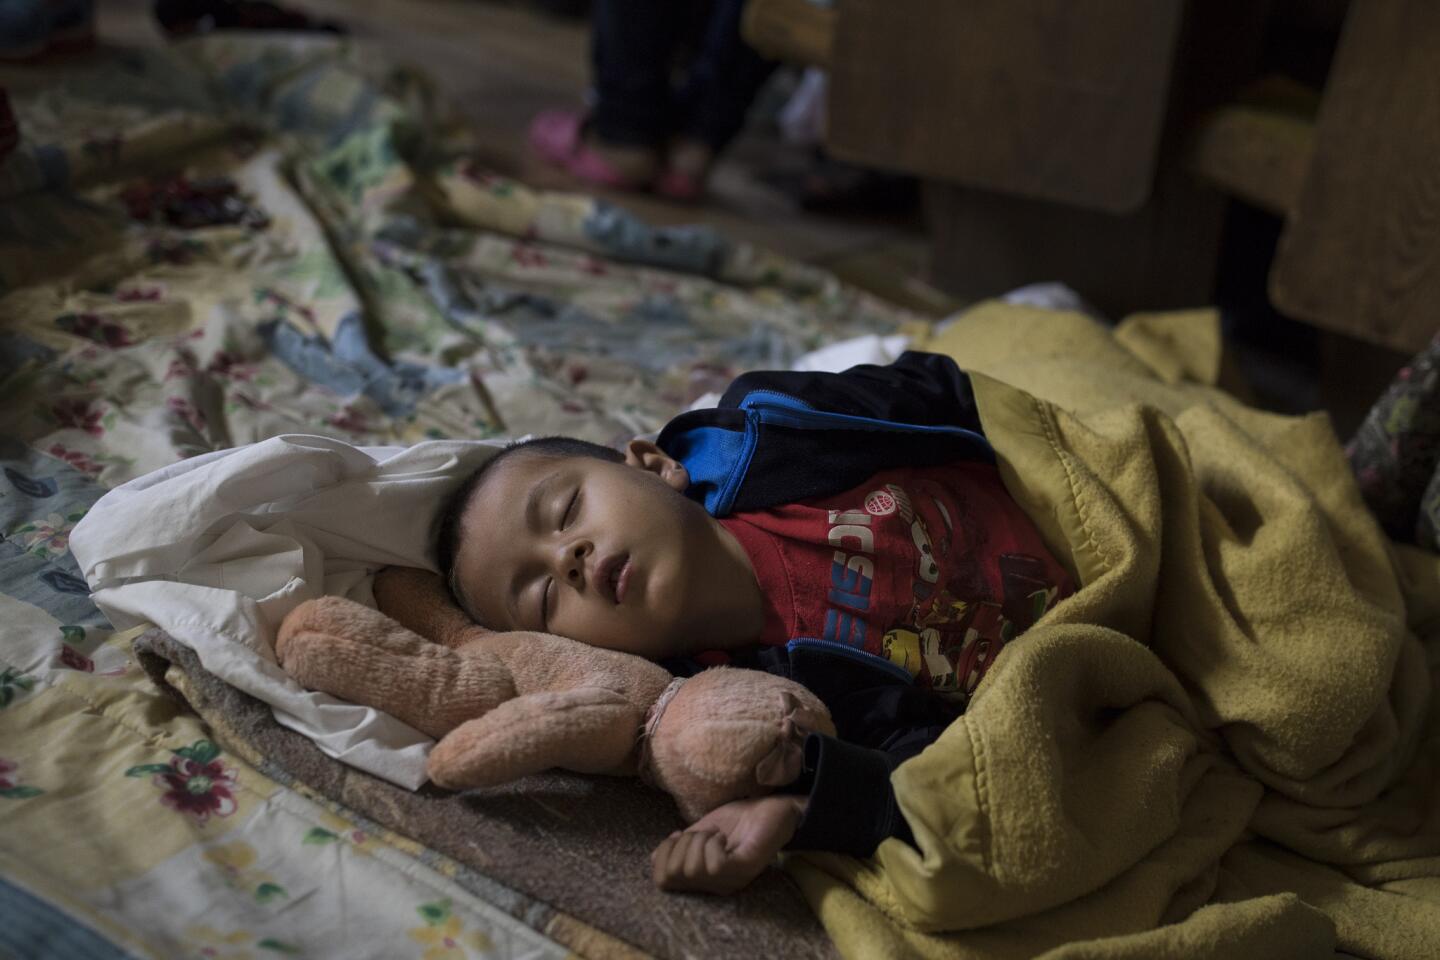 A Central American child who is traveling with a caravan of migrants sleeps at a shelter in Tijuana, Mexico, on April 29, 2018. U.S. immigration lawyers are telling Central Americans in a caravan of asylum-seekers that traveled through Mexico to the border with San Diego that they face possible separation from their children and detention for many months.